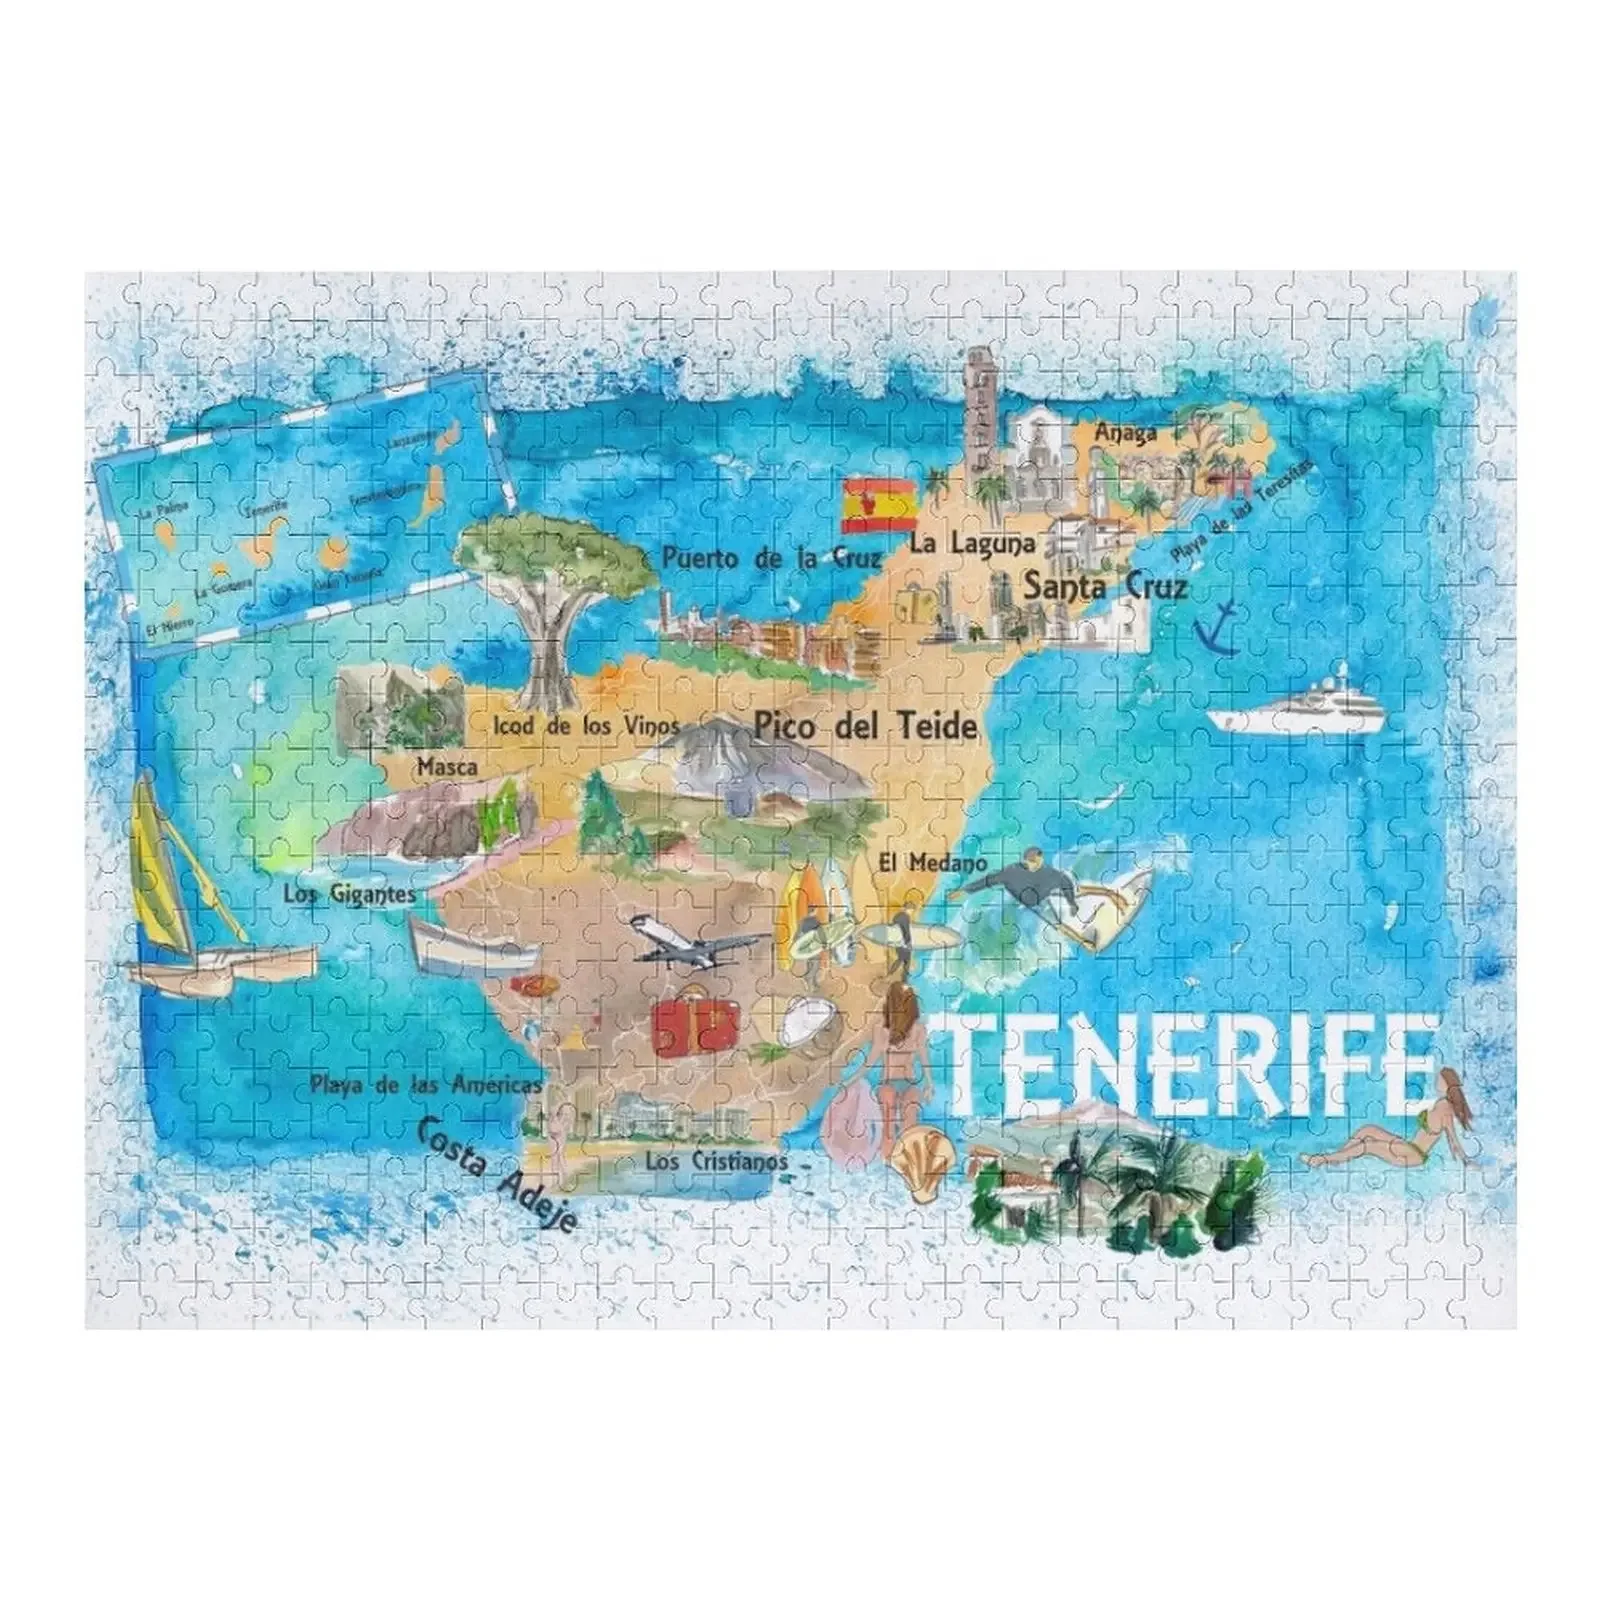 Tenerife Canarias Spain Illustrated Map with Landmarks and Highlights Jigsaw Puzzle Wooden Adults Personalized Name Puzzle 128 pages 25 25cm spain europe travel art coloring book adults kids decompression painting graffiti with reference picture